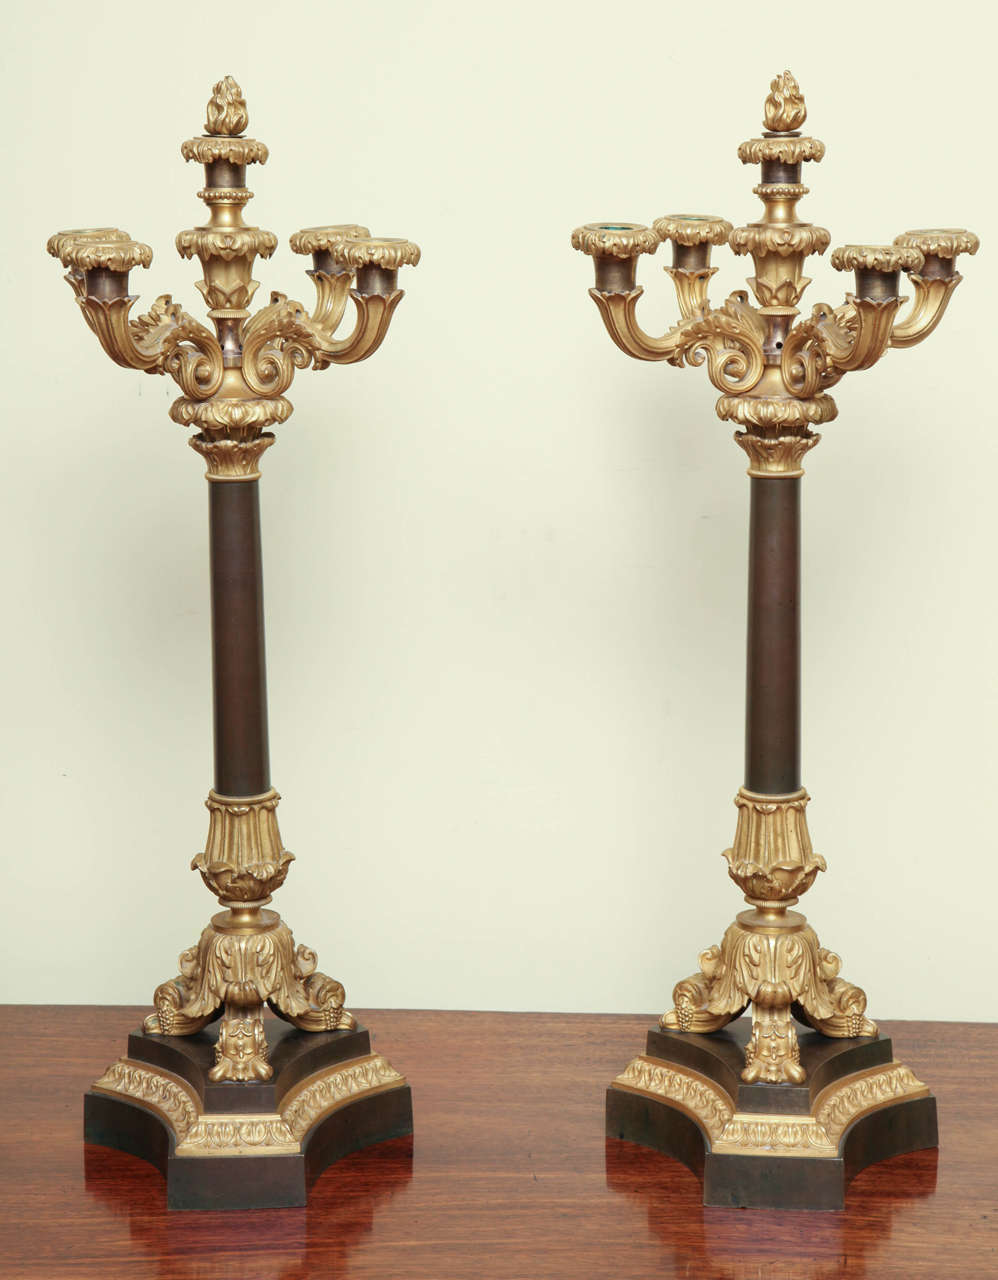 Fine Antique Pair of Louis Philippe Ormolu and Patinated Bronze five-light candelabra, having four scrolled ormolu candle arms surrounding a central raised shaft with a flame form finial which is removable to form the fifth candleholder, all